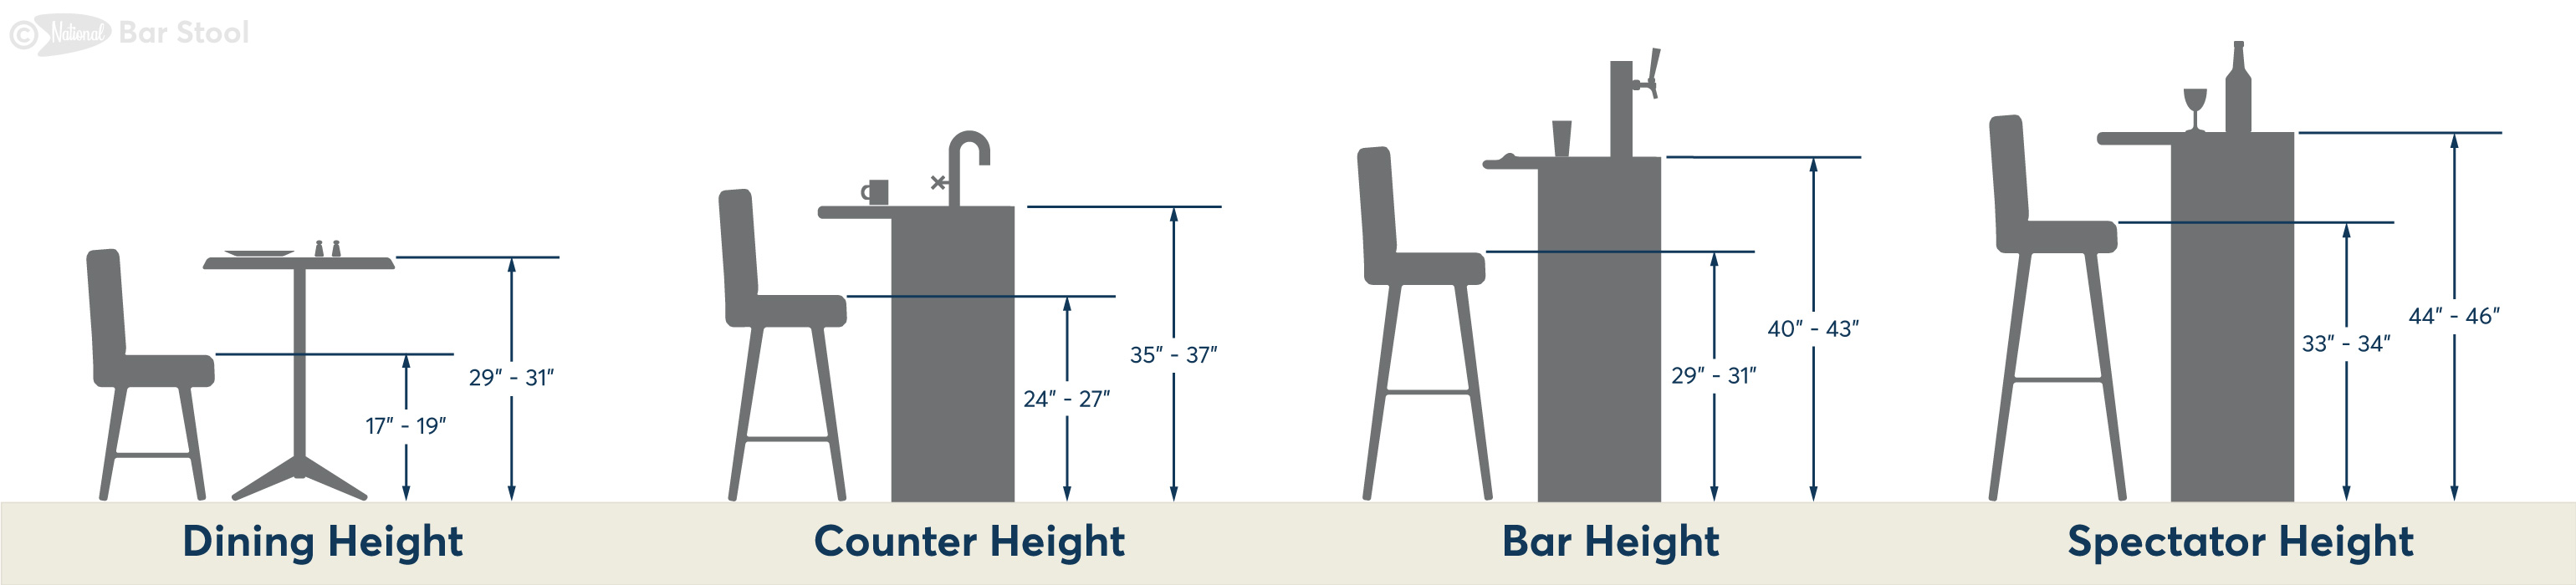 Bar Stool Ing Guide National, Bar Height Stools Vs Counter Height